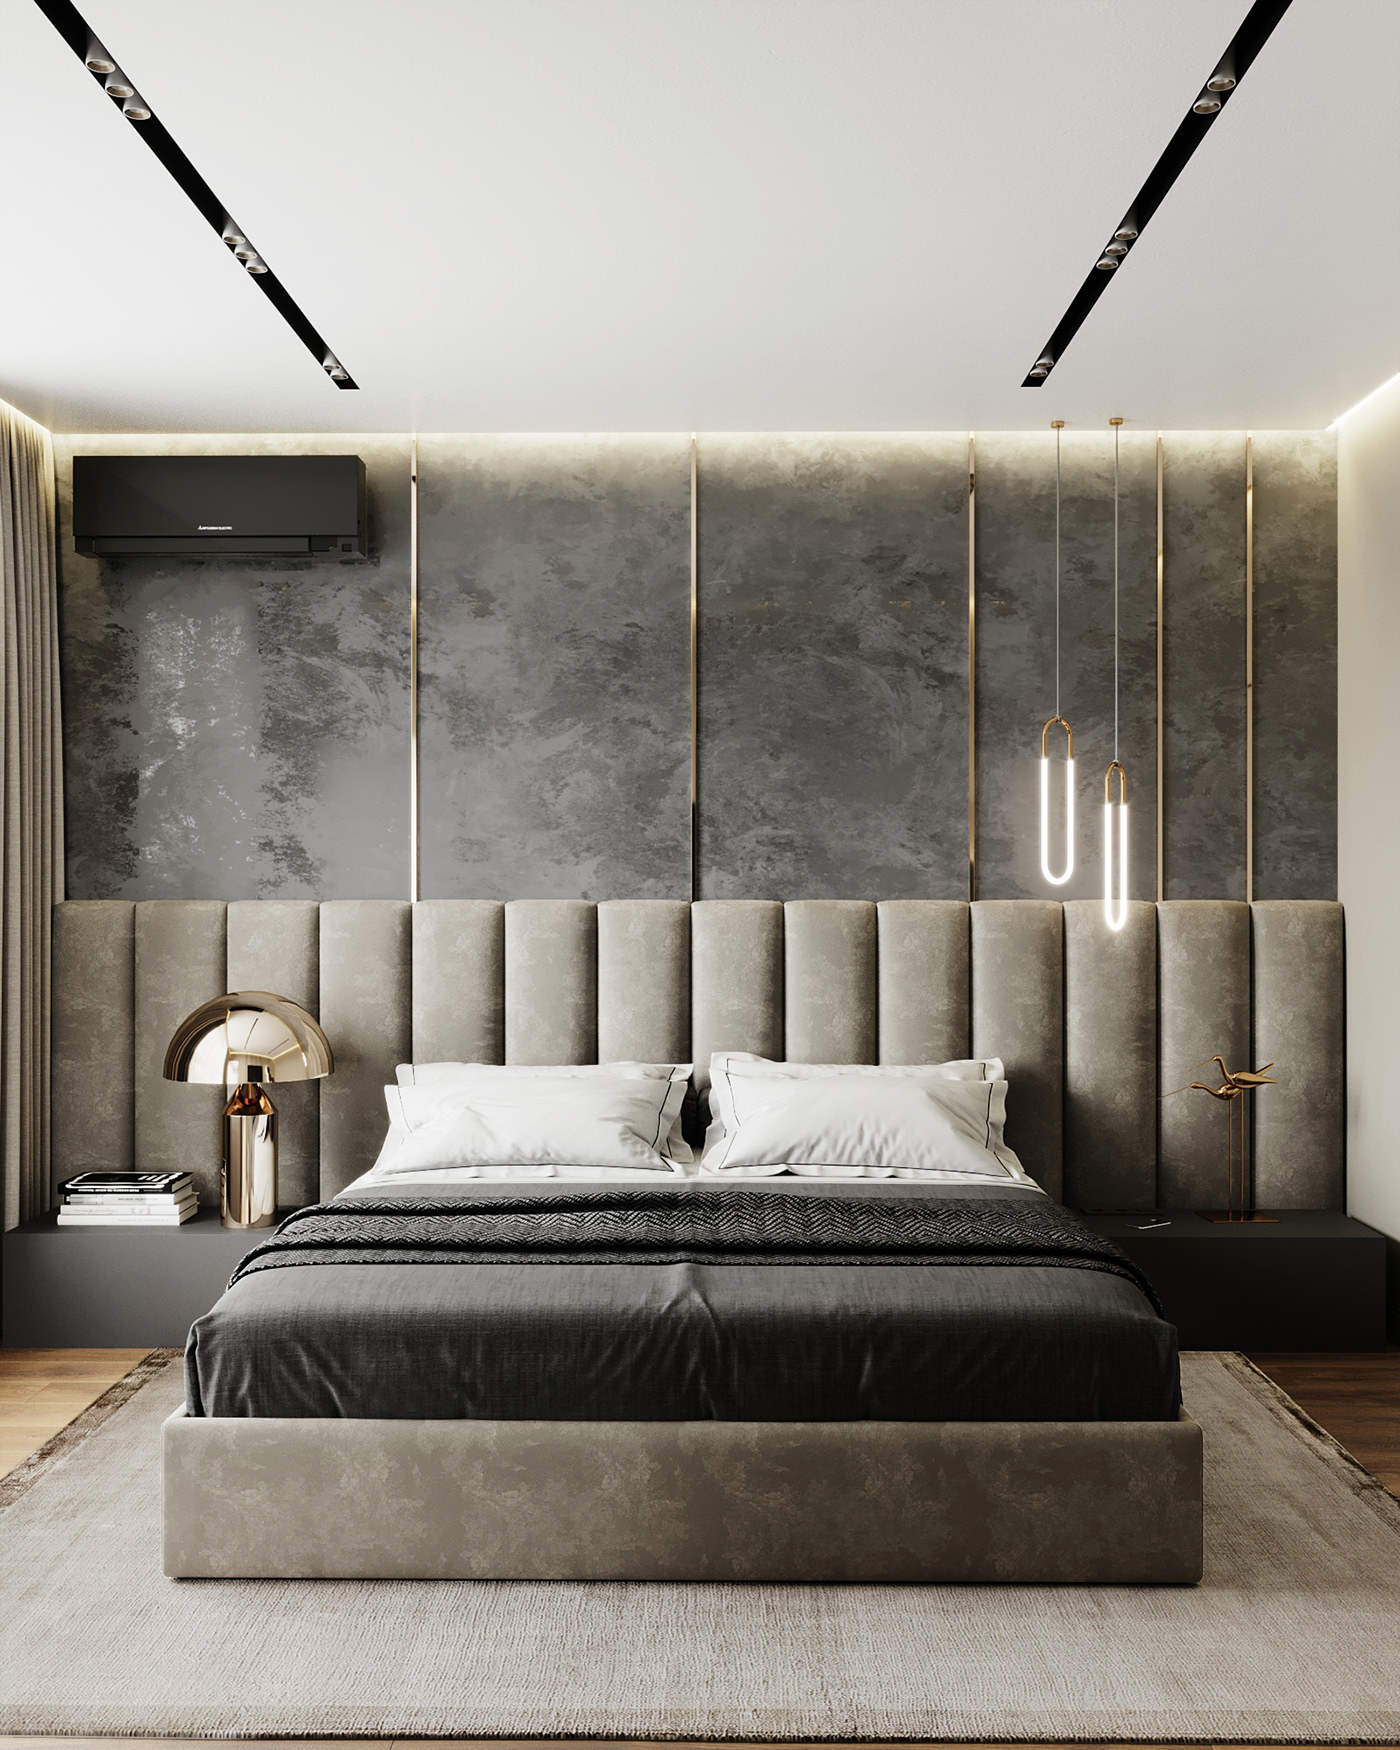 Bedroom "50 shades of gray" on Behance